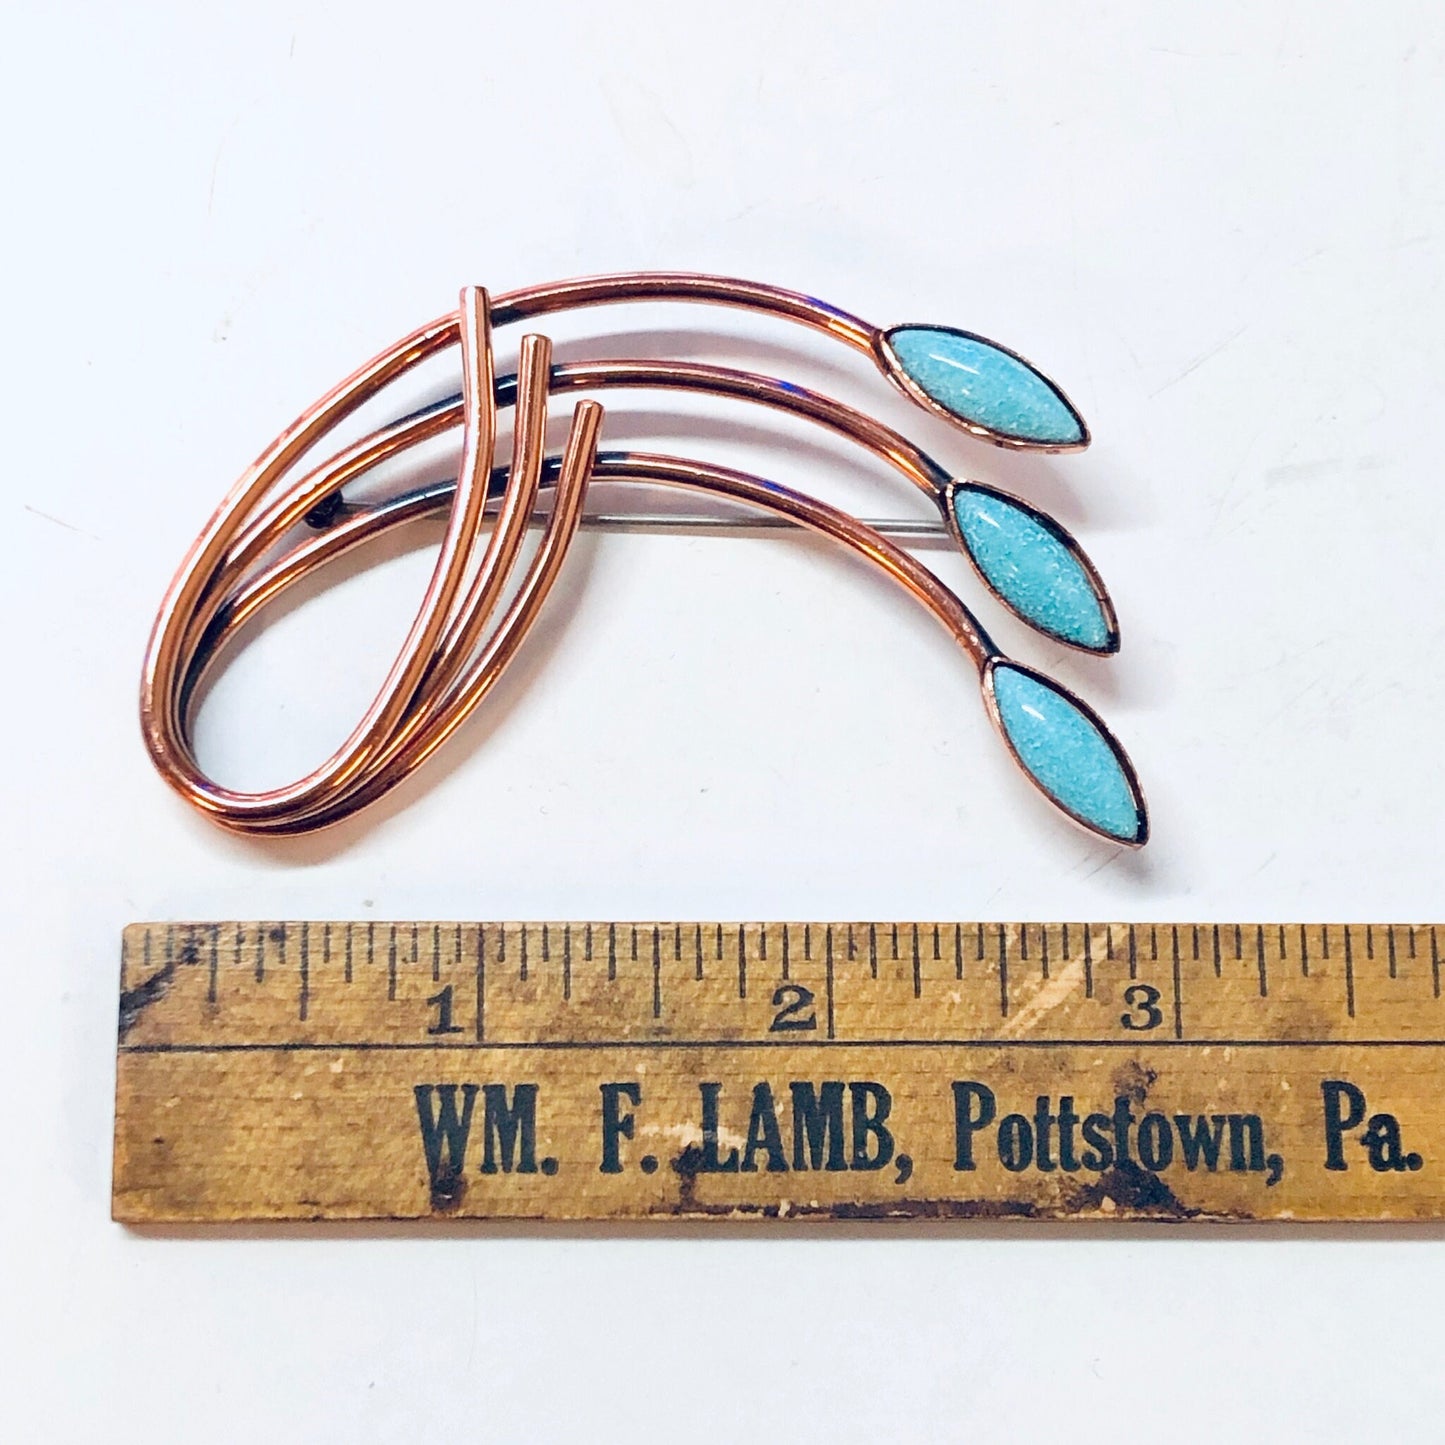 Vintage copper brooch with three elongated blue turquoise stones, resembling a Matisse or Renoir design, shown with ruler for scale.